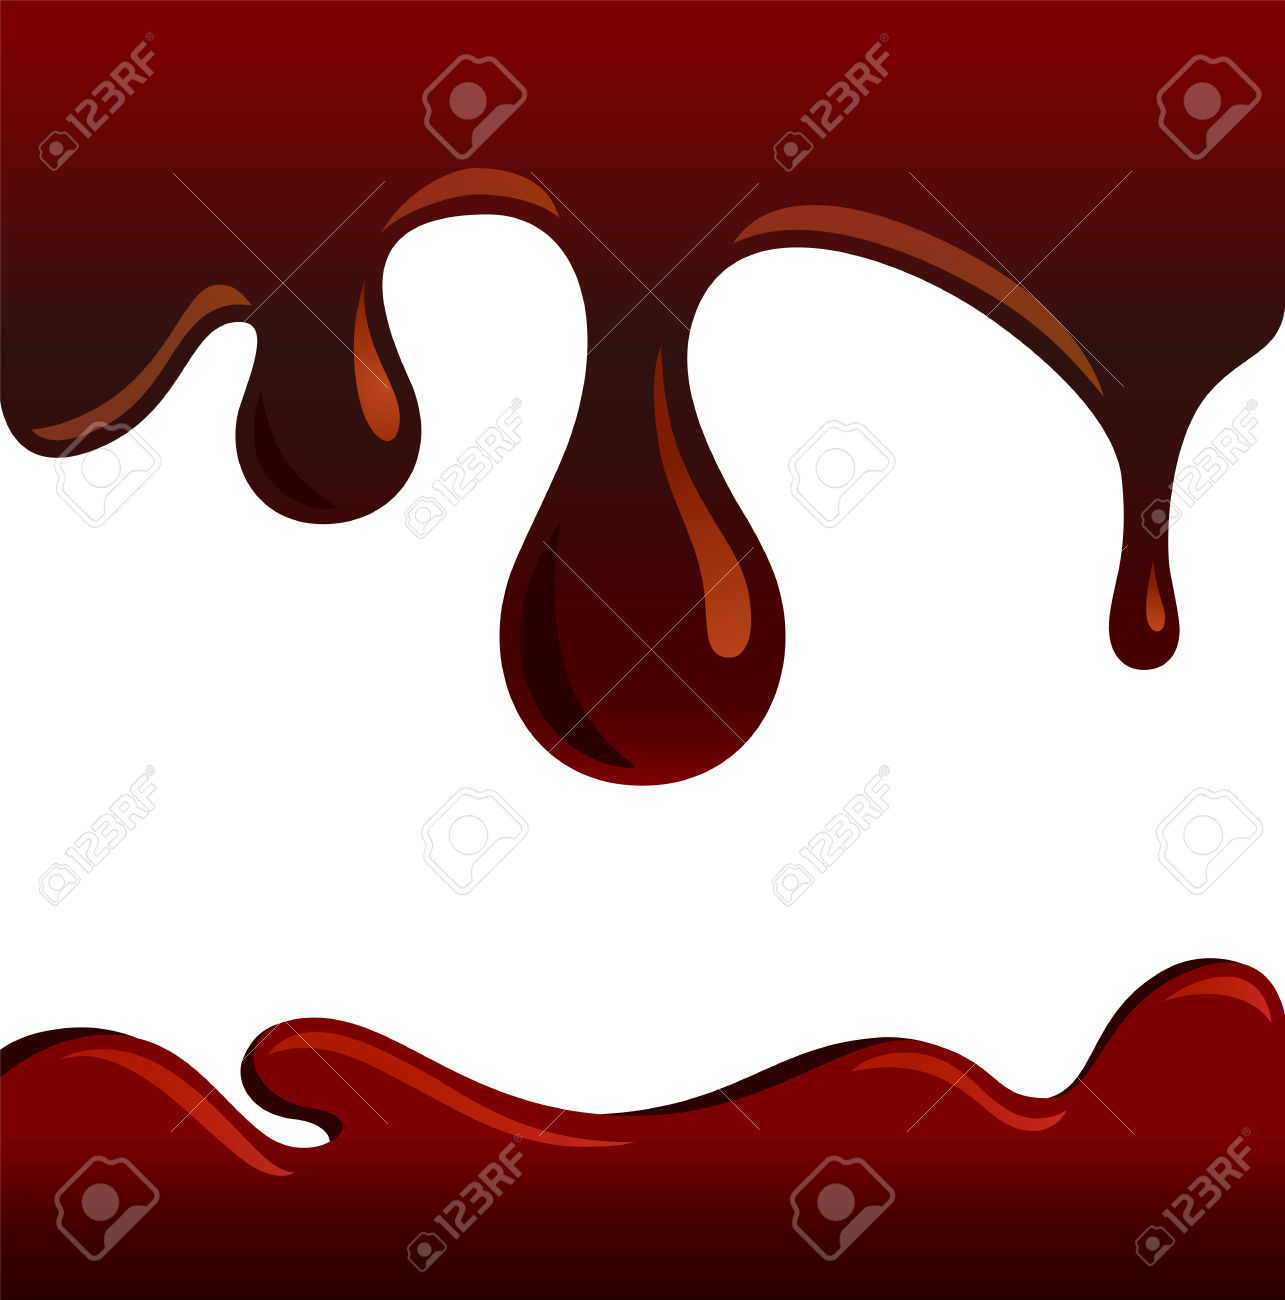 1,442 Chocolate Sauce Stock Vector Illustration And Royalty Free.